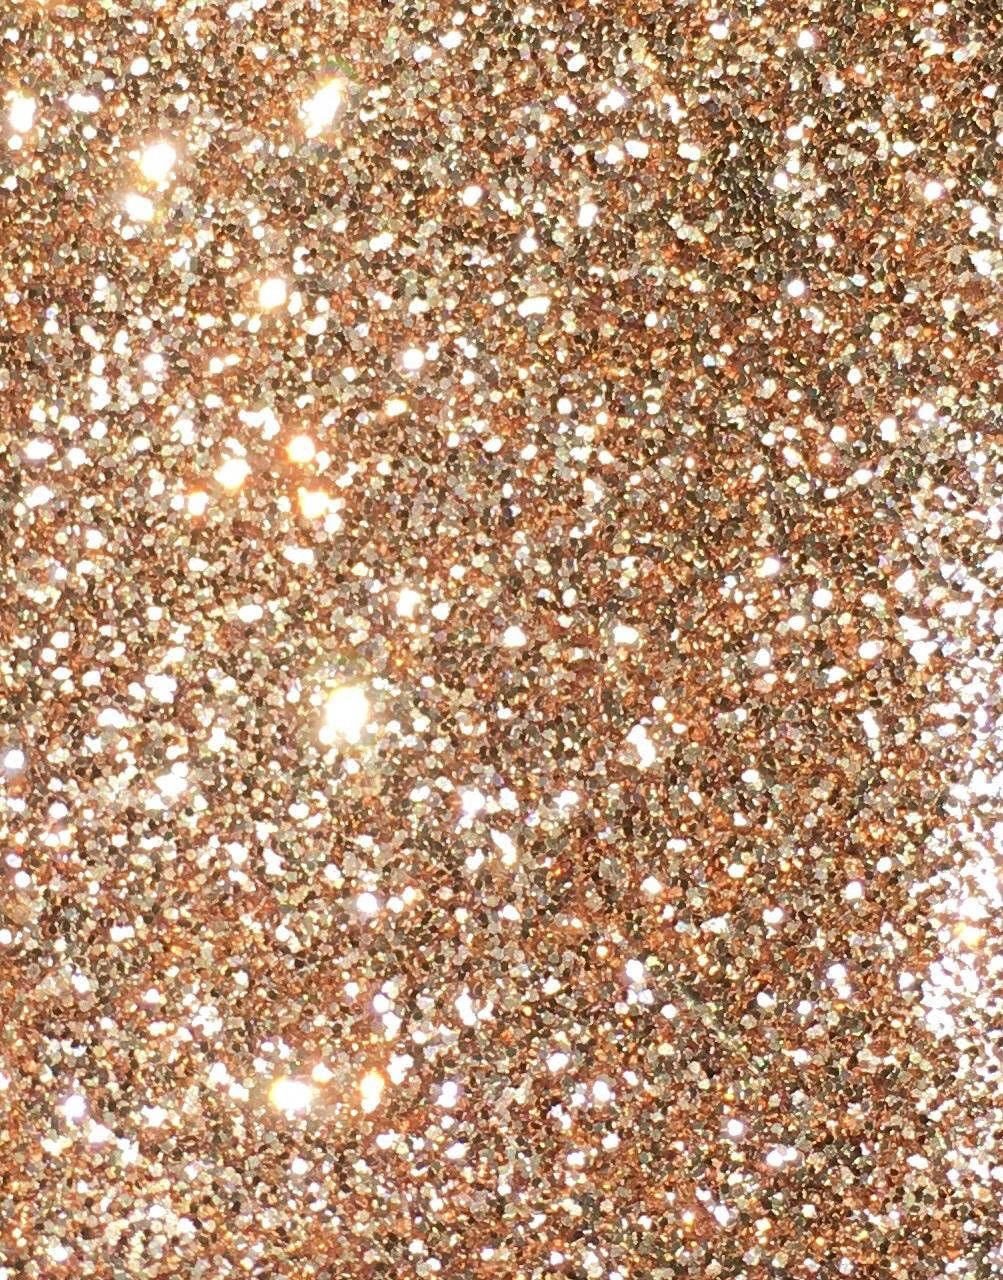 A close up of gold glitter on the ground - Gold, glitter